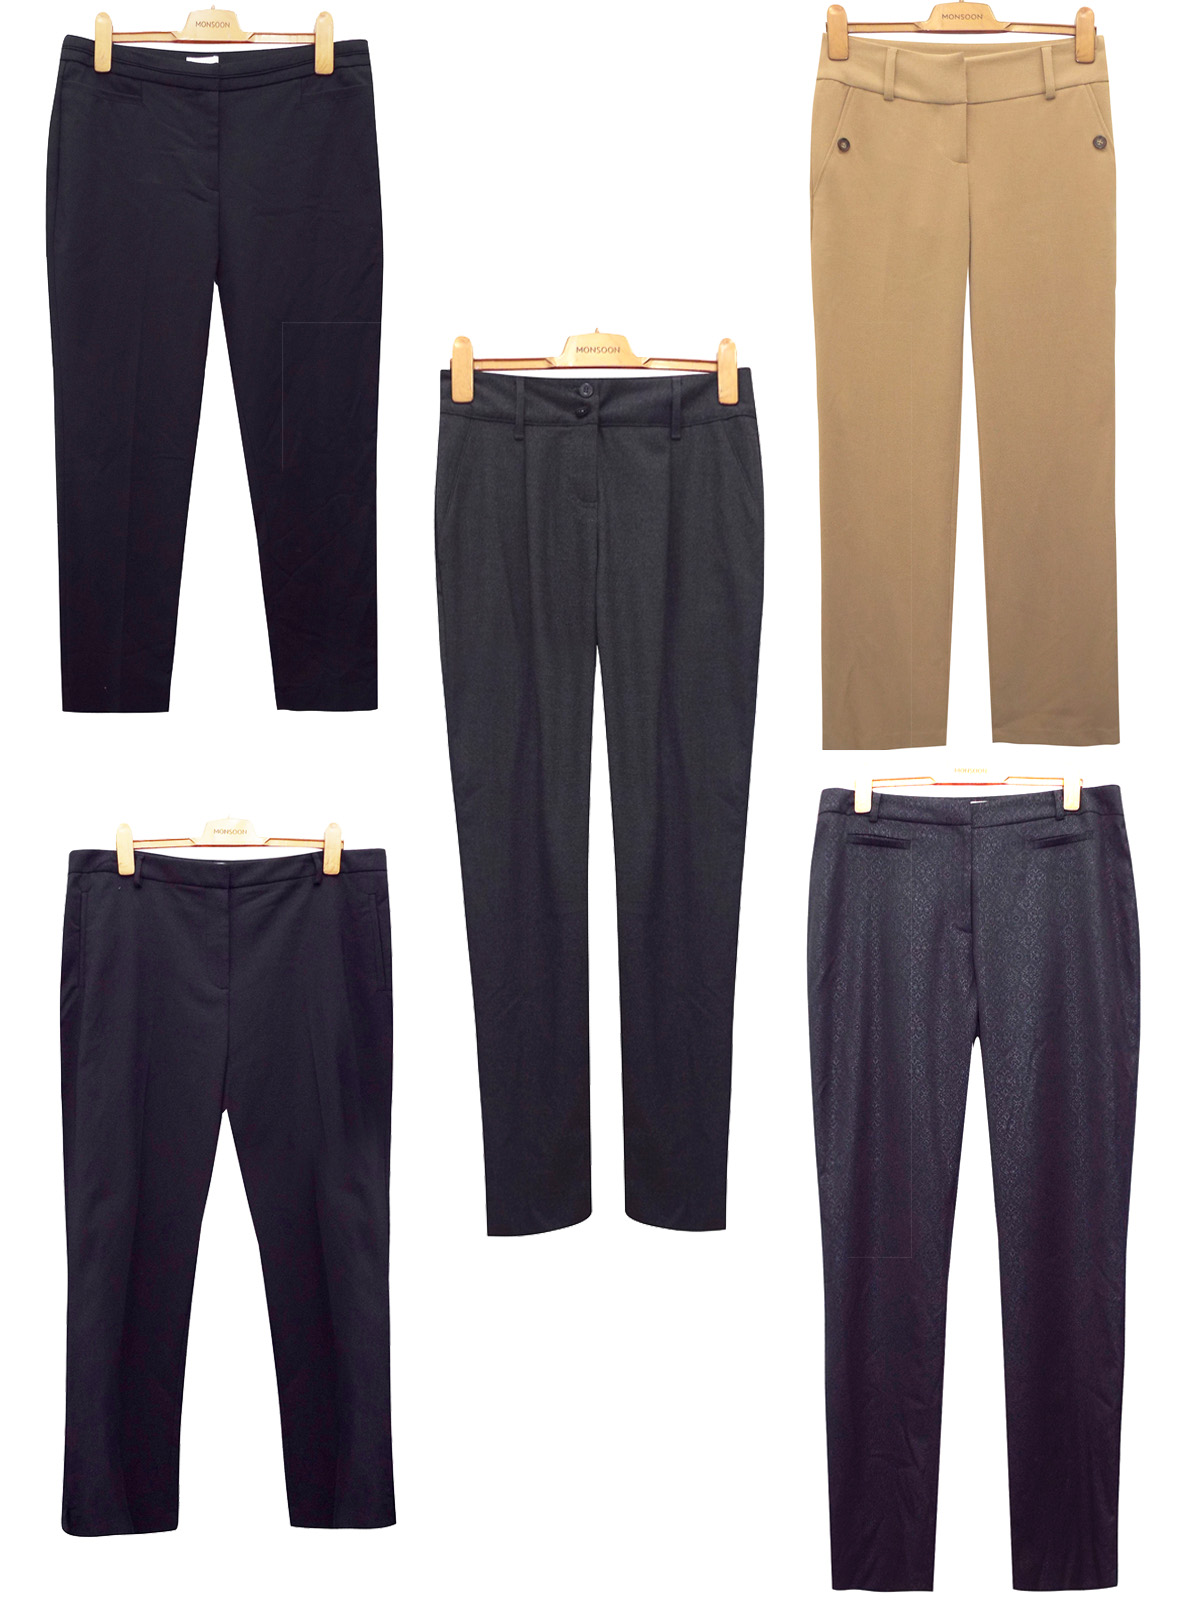 M0NSOON ASSORTED Ladies Trousers - Size 8 to 22